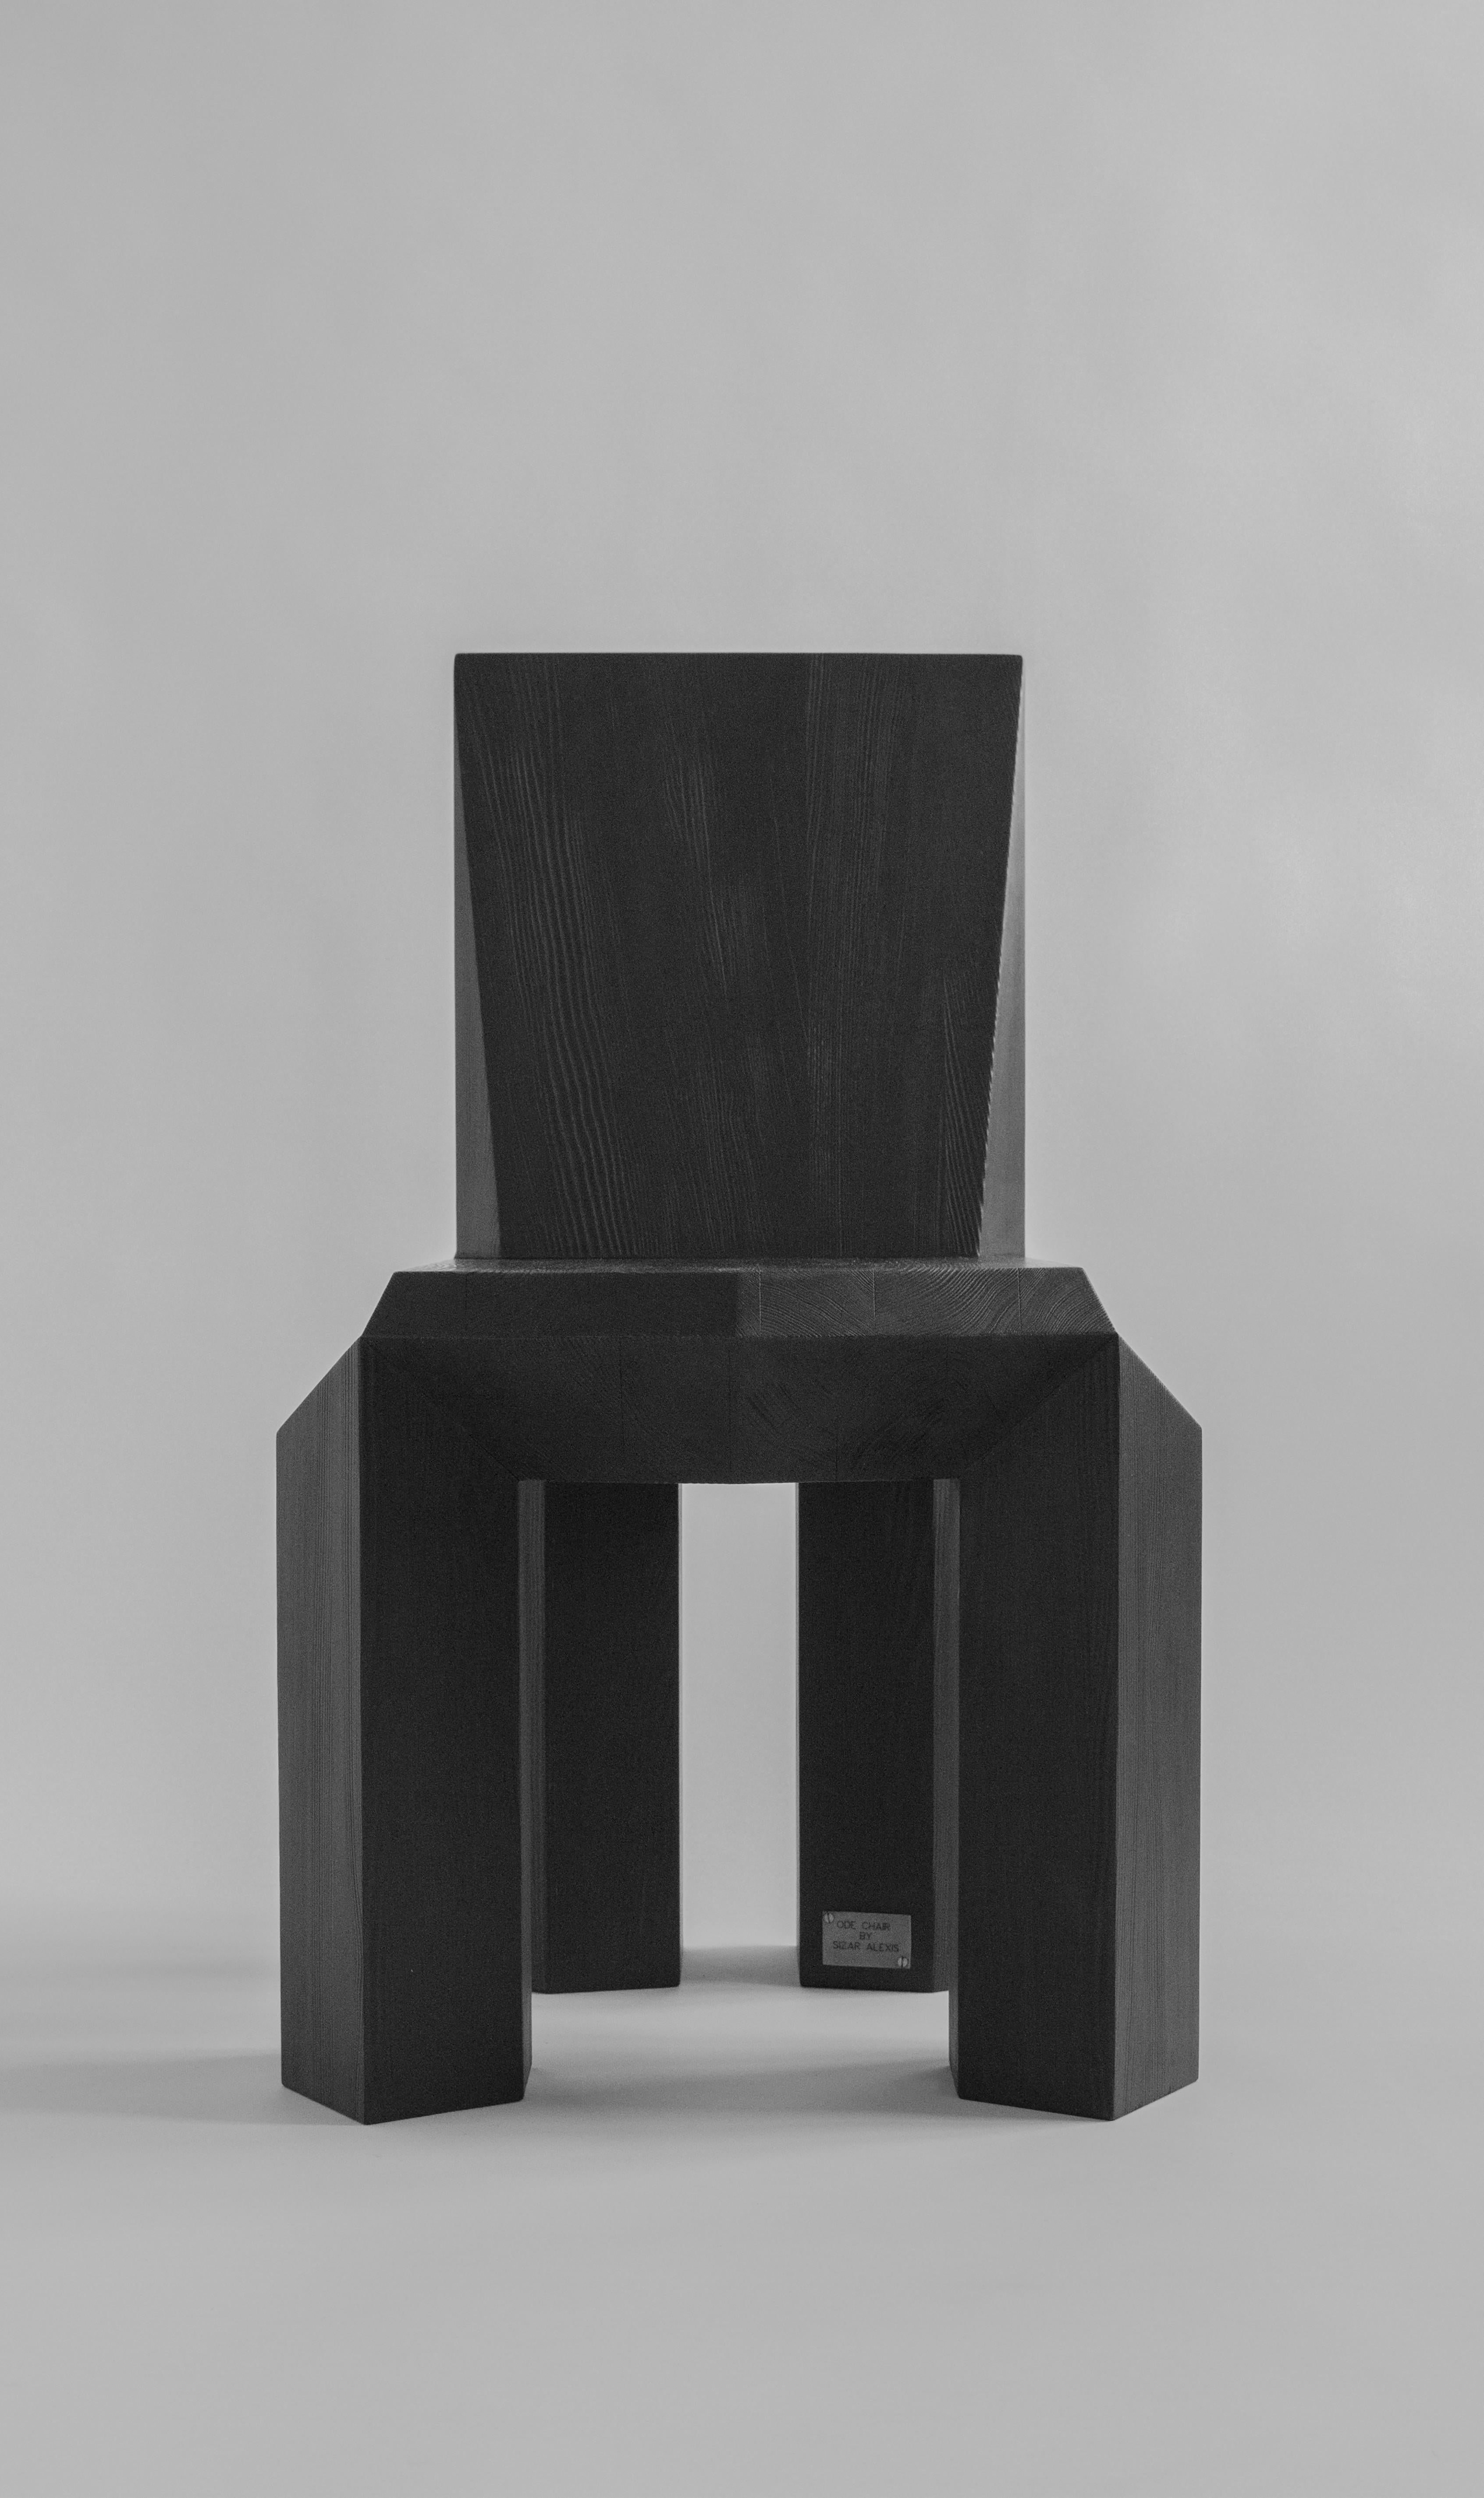 Burned ode chair by Sizar Alexis
Signed and numered
Edition of 12
Dimensions: Length 45 x width 55 x height 74 cm
Materials: Burned pine wood

The hexagon has more to it than we think, and some of the aspects of this shape are